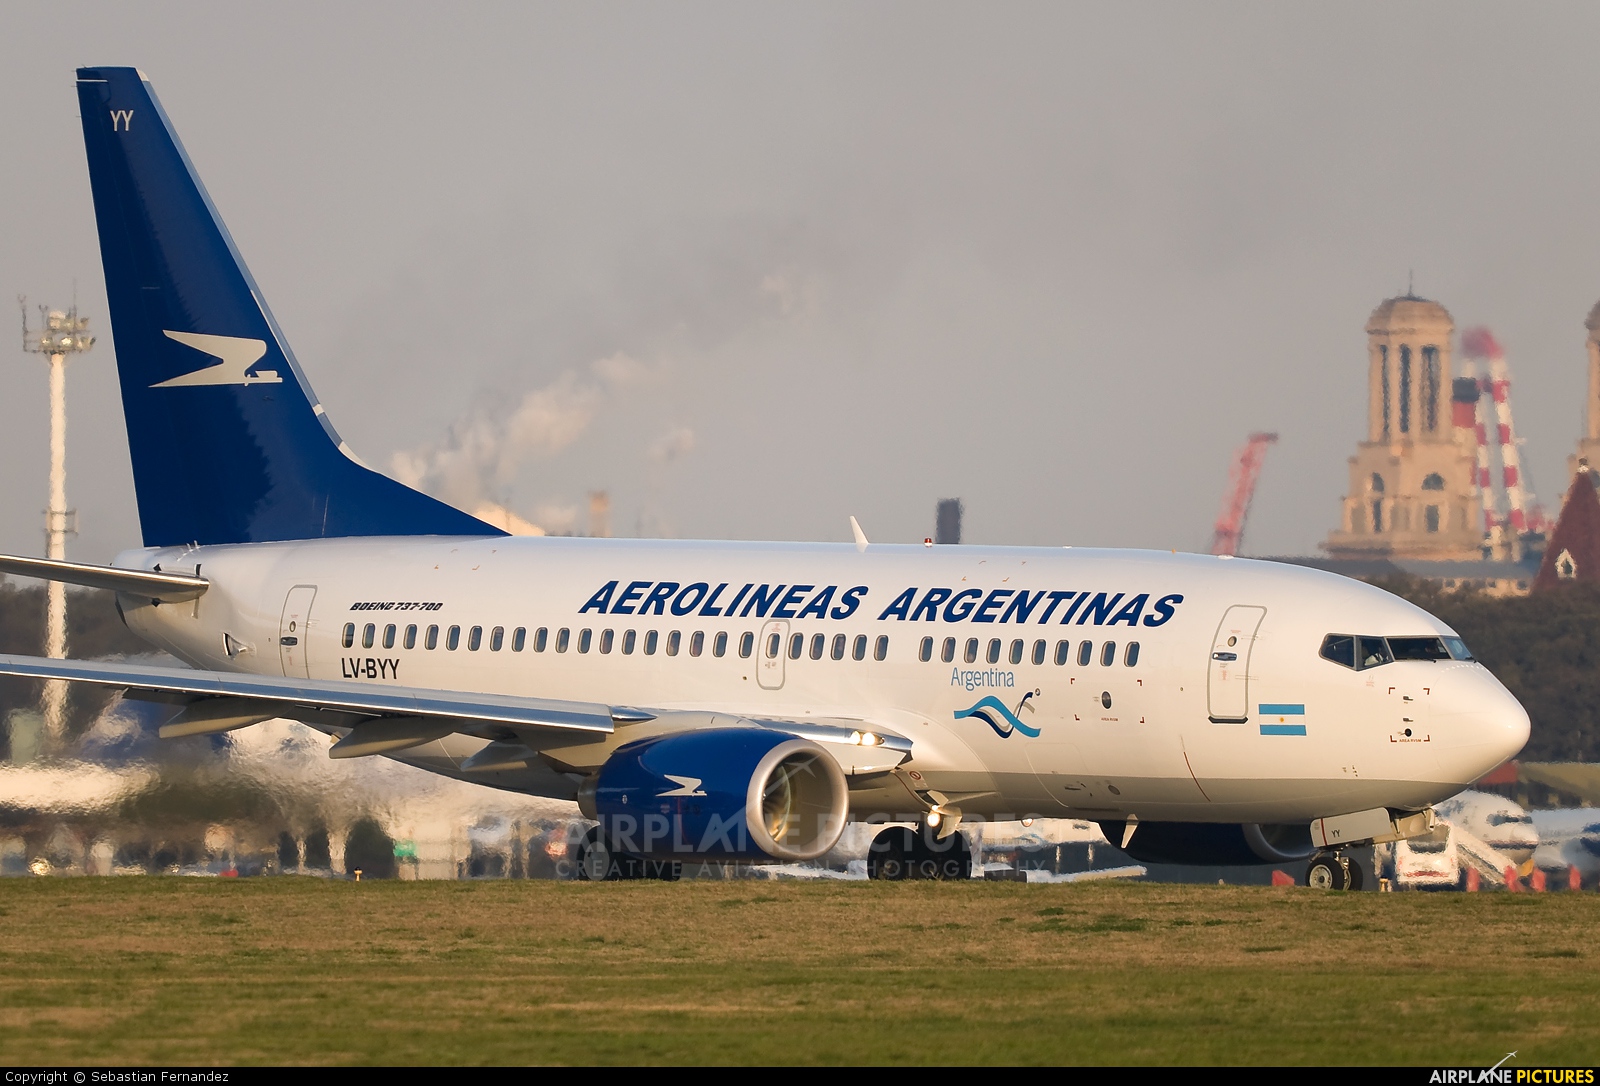 Aerolineas Argentinas LV-BYY aircraft at Buenos Aires - Jorge Newbery